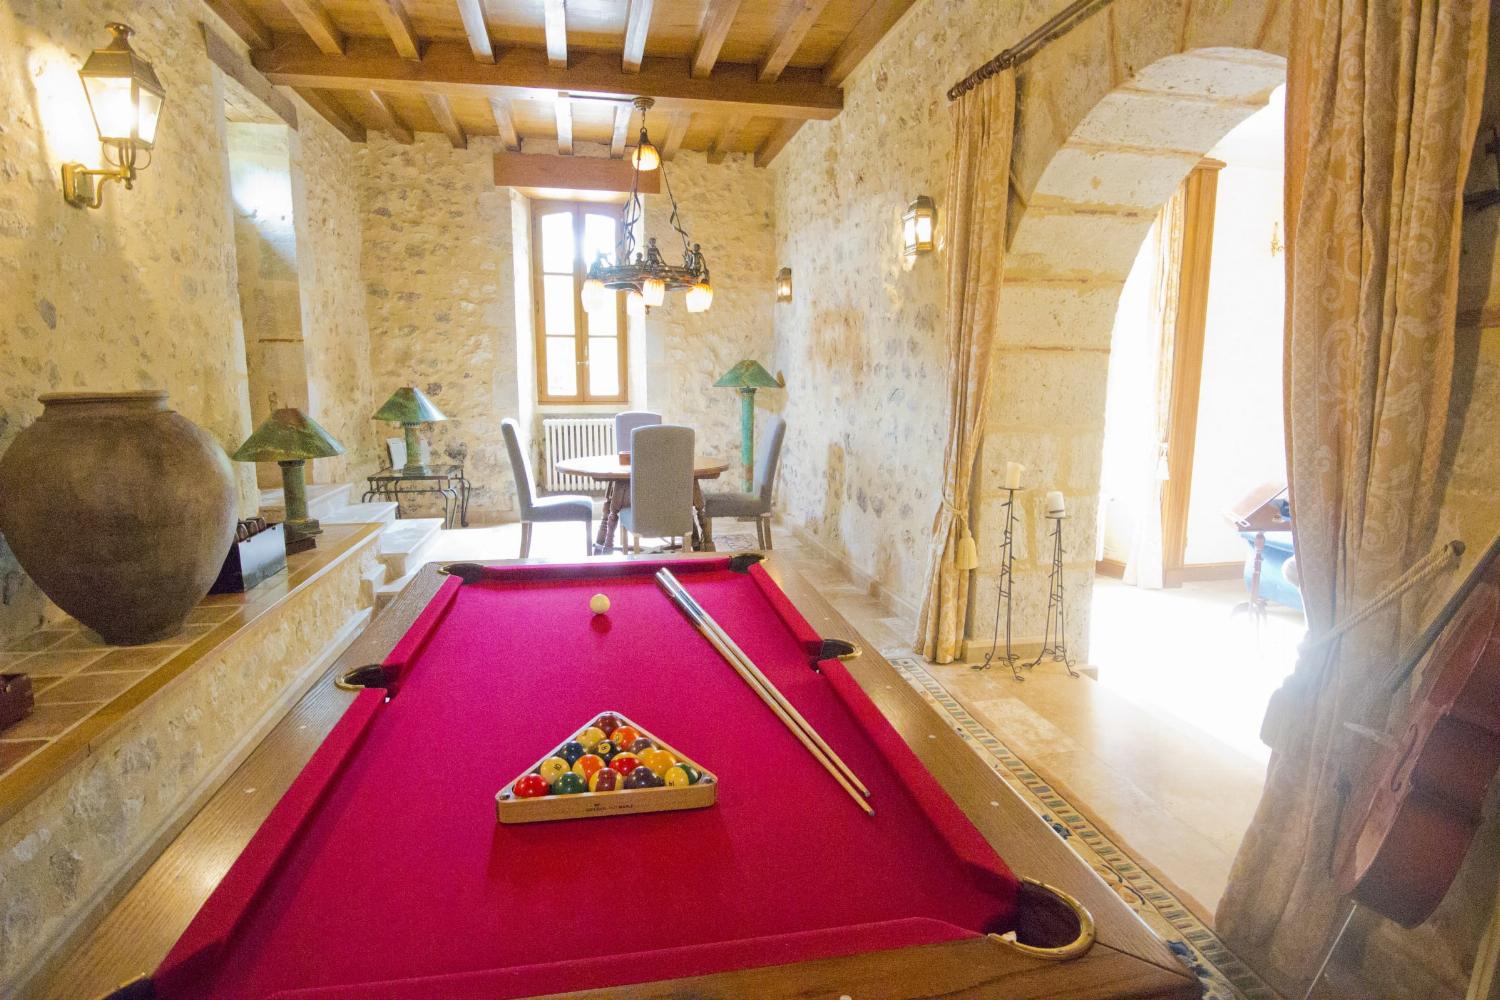 Pool table | Holiday château in Dordogne